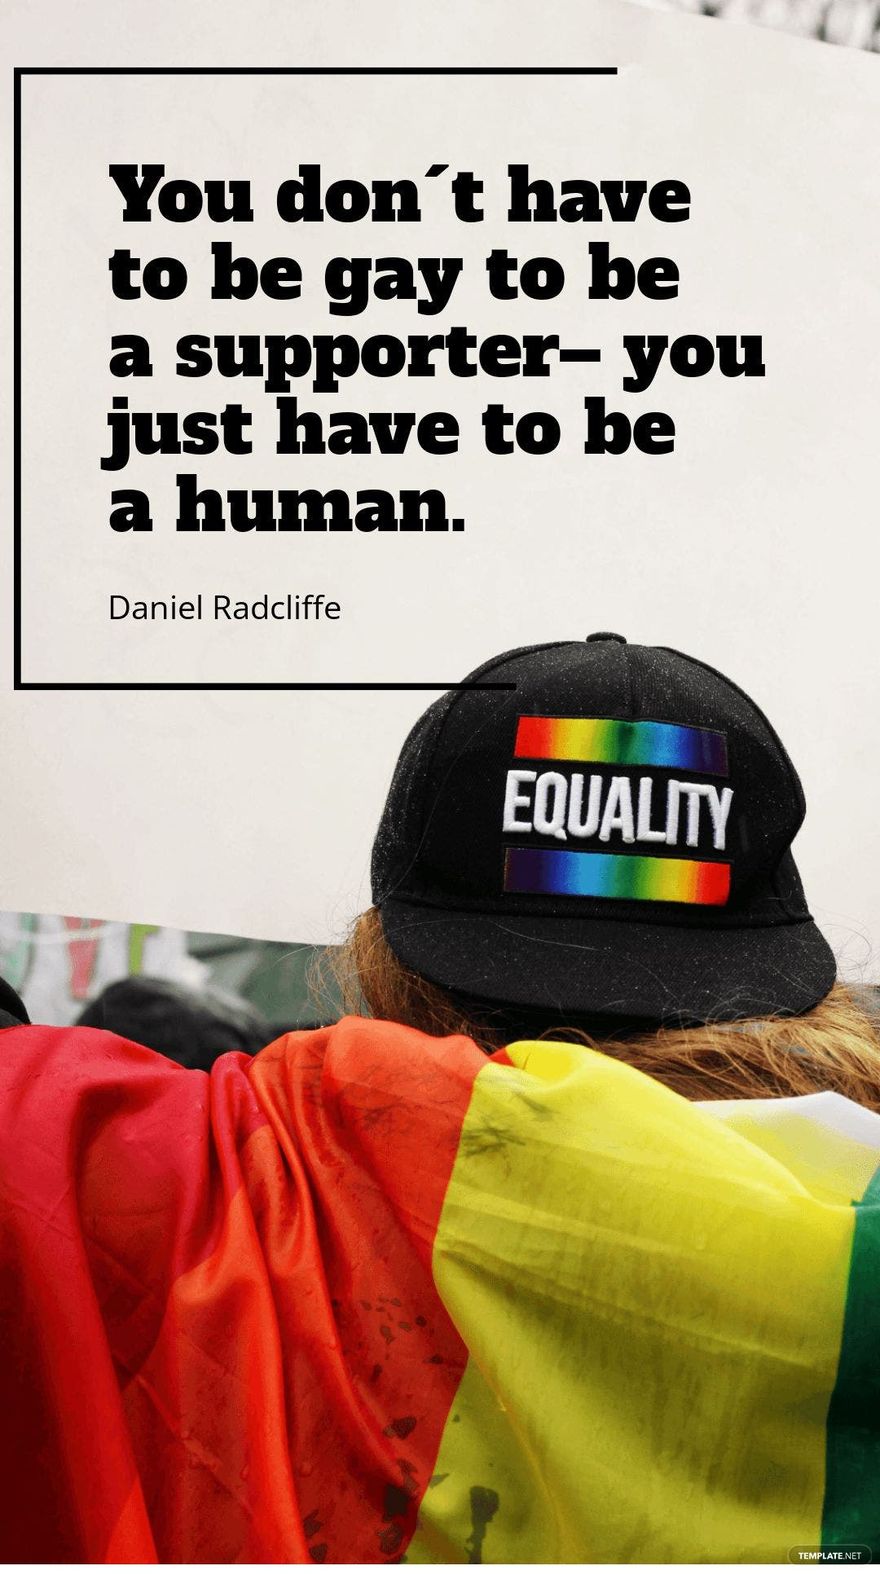 Daniel Radcliffe - You don´t have to be gay to be a supporter – you just have to be a human.